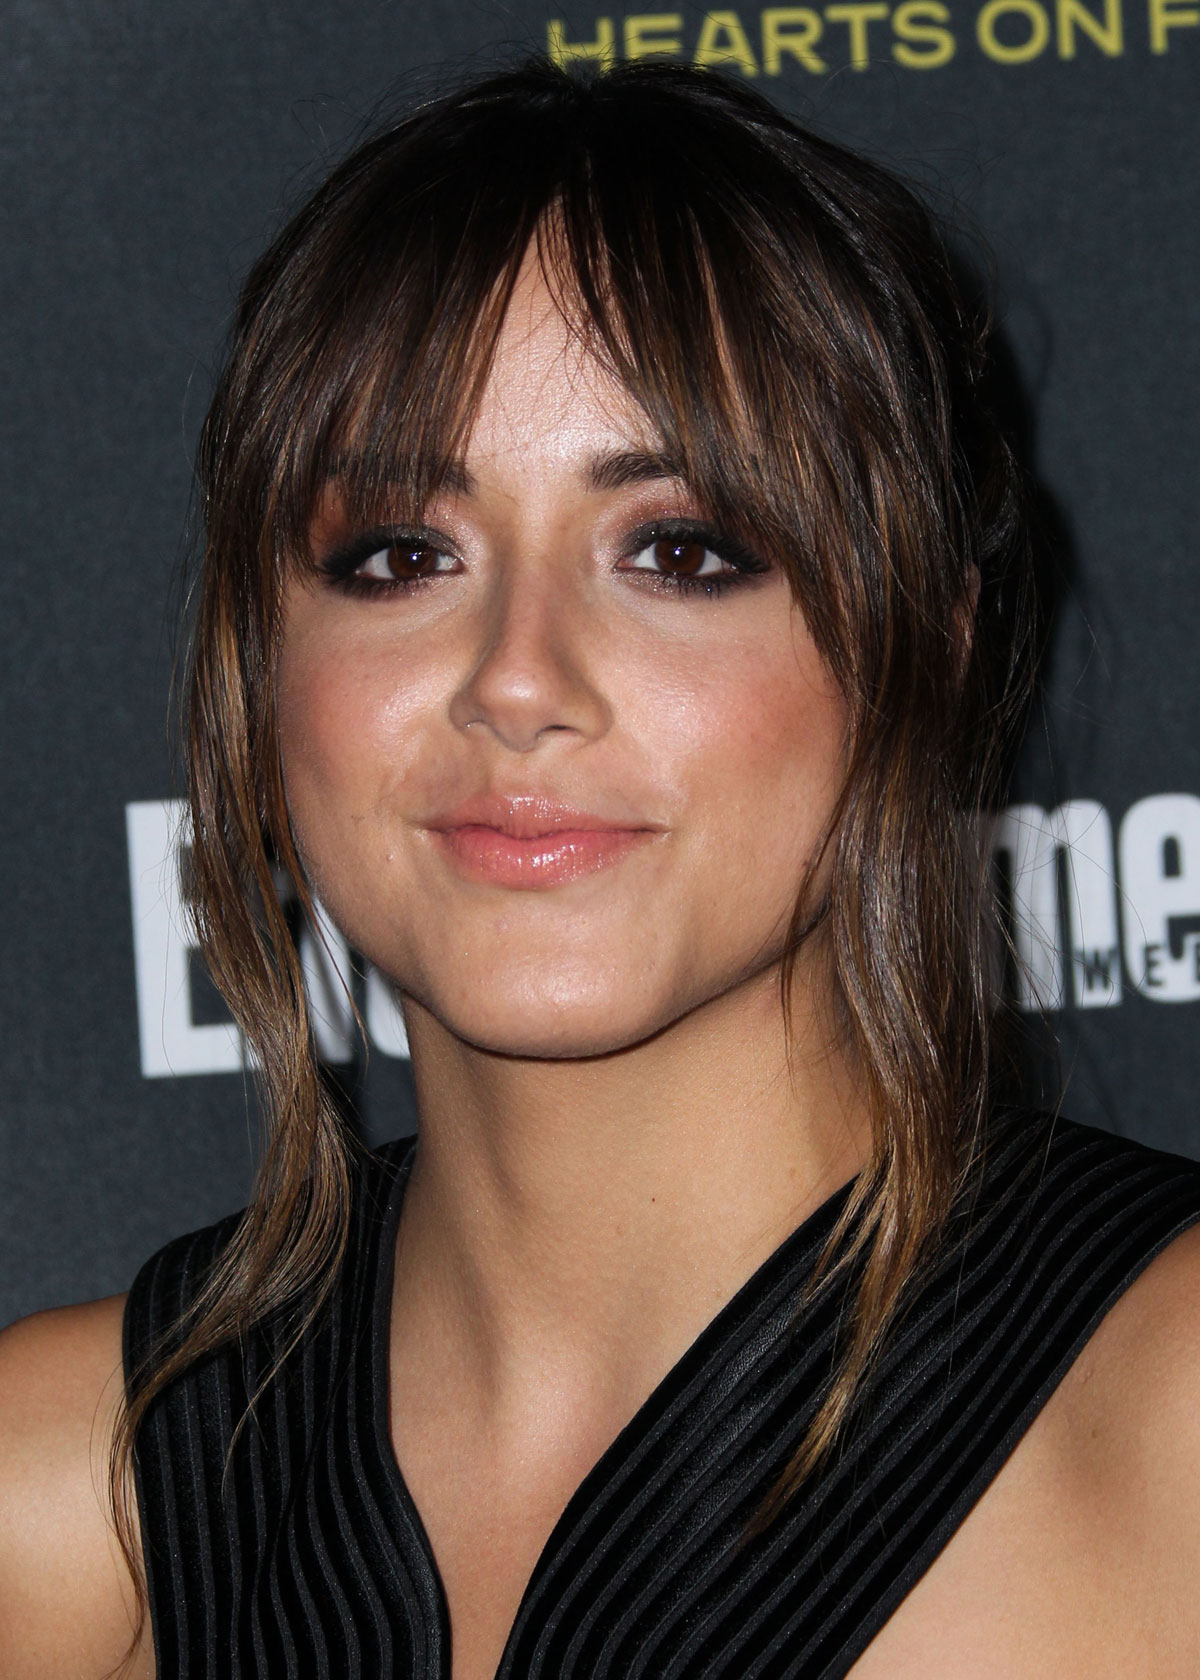 Chloe Bennet attends Entertainment Weekly’s Pre-Emmy Party